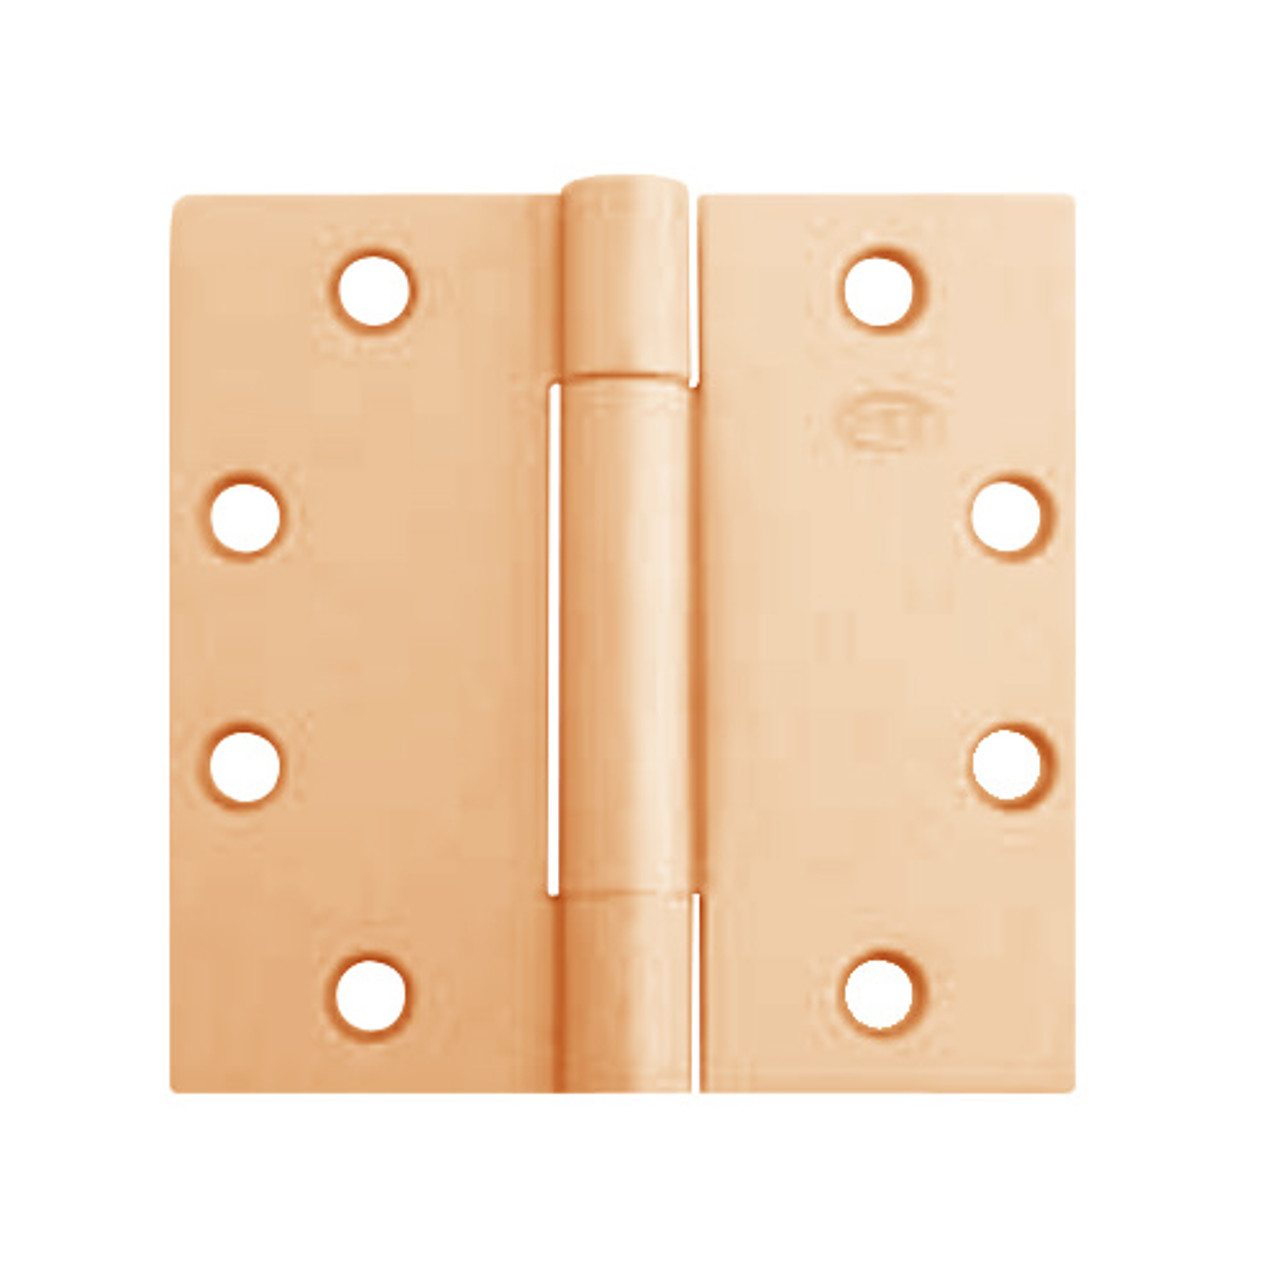 3PB1-4-5x4-639 IVES 3 Knuckle Plain Bearing Full Mortise Hinge in Satin Bronze Plated